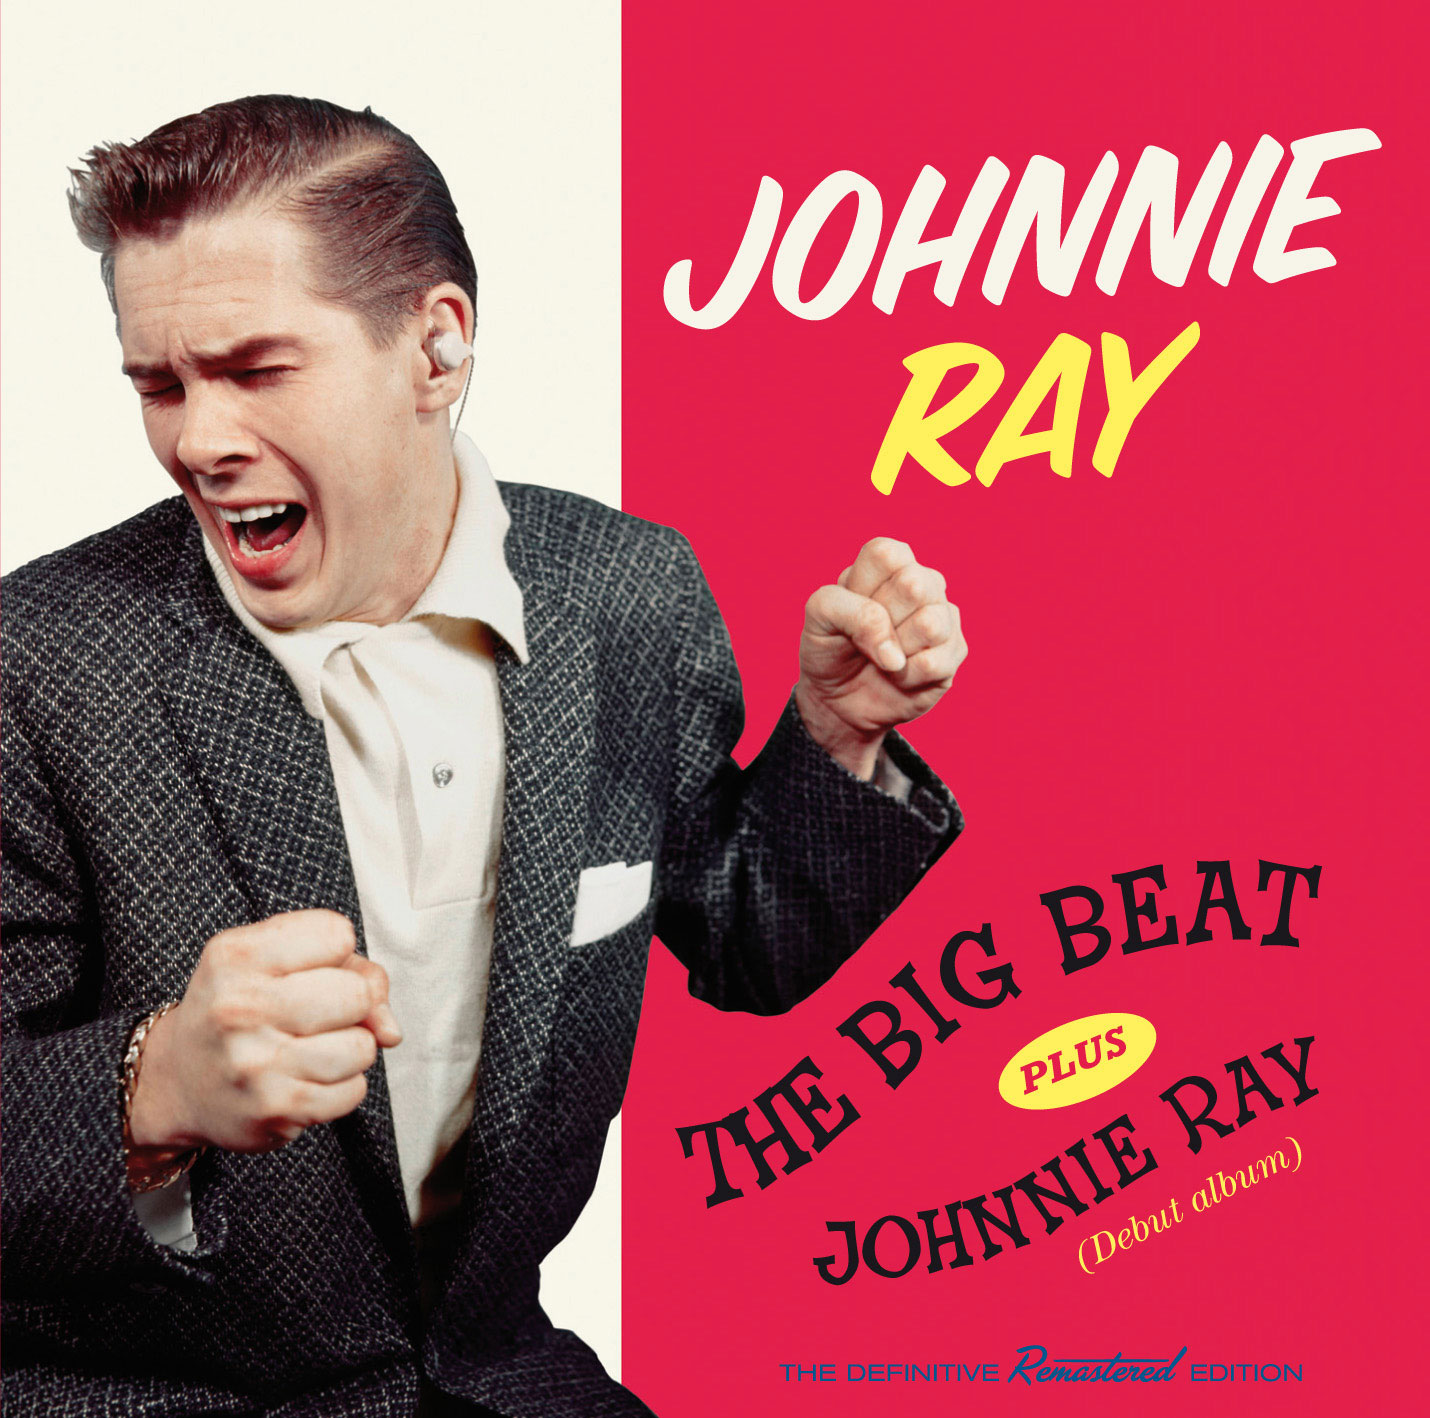 johnnie-ray-images